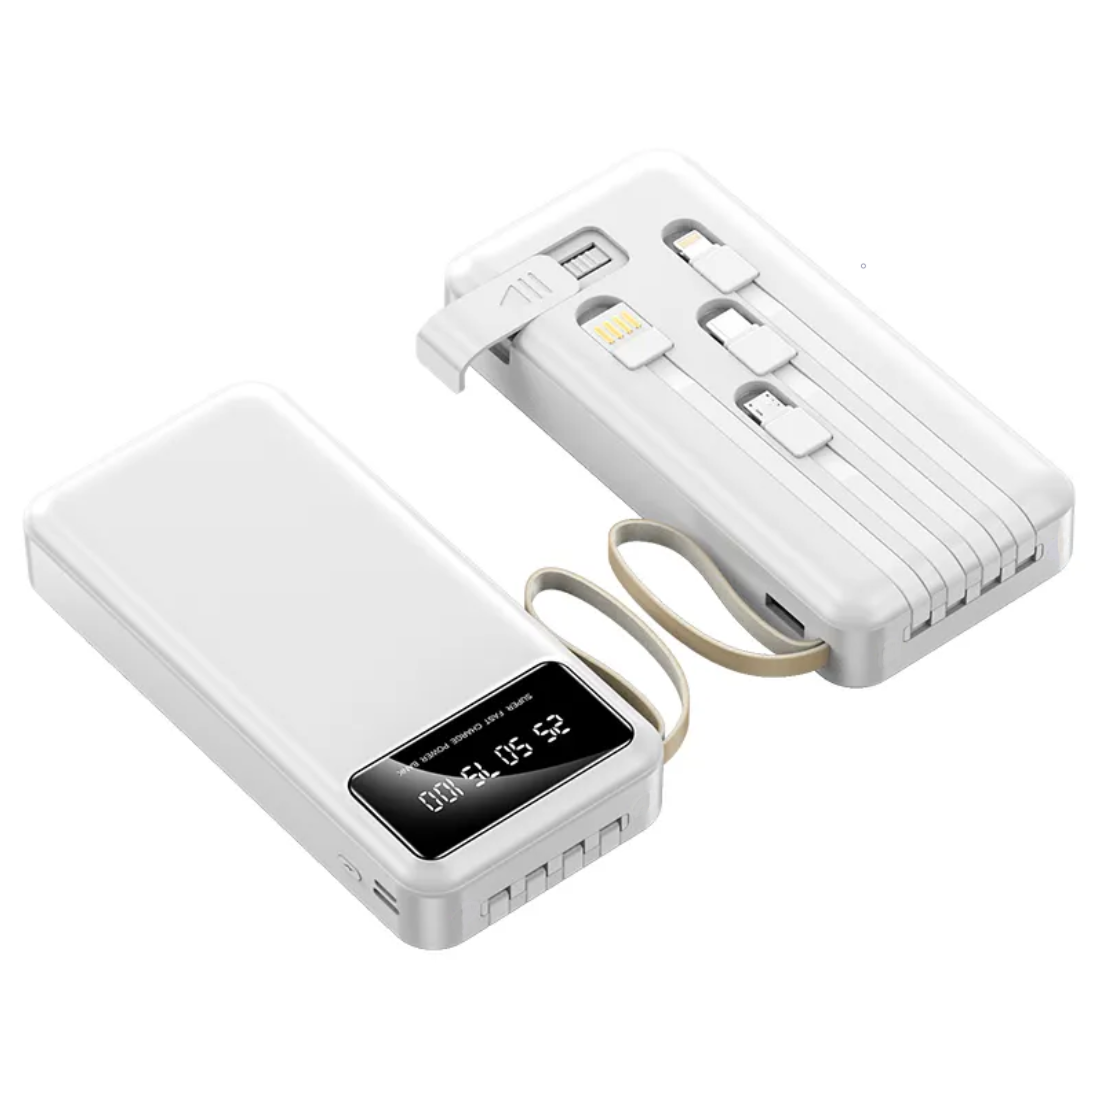 Digital display power bank comes with 4-wire 10000 mAh Capacity (1inch Display)